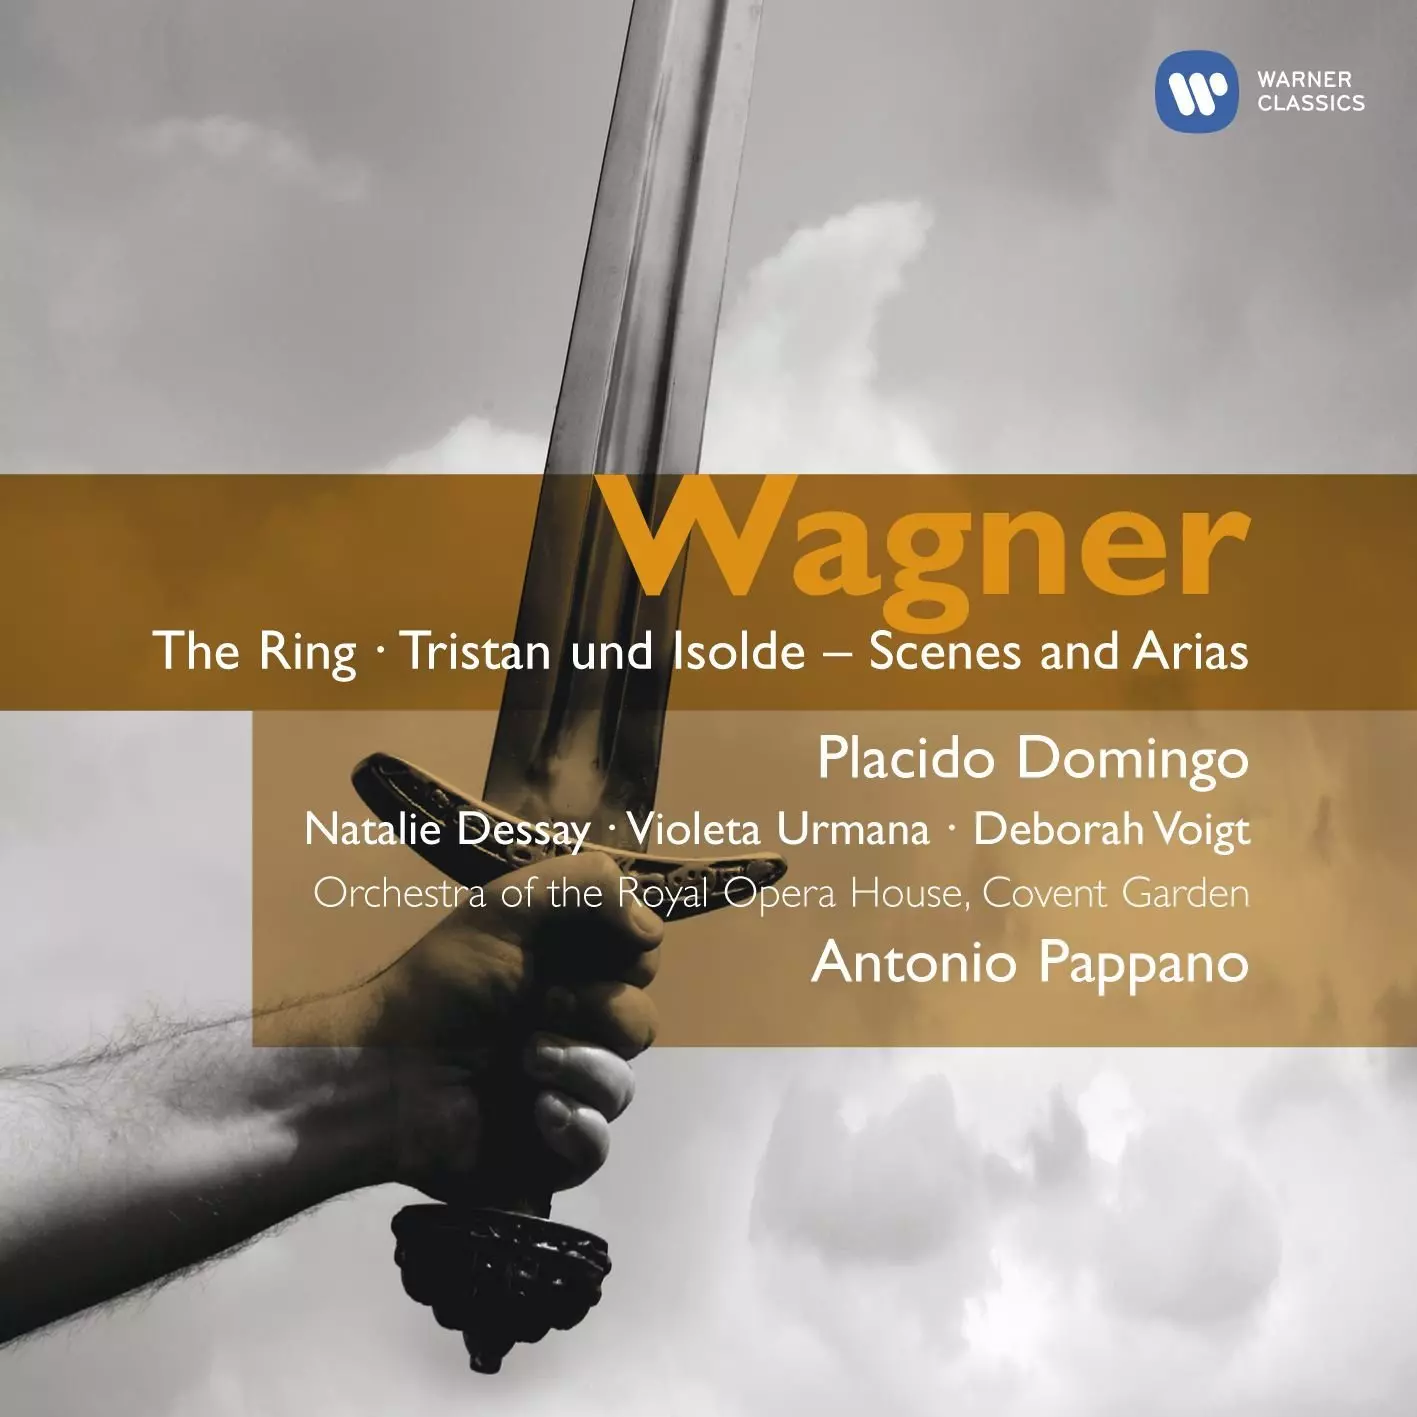 Wagner: The Ring, Tristan und Isolde - Scenes and